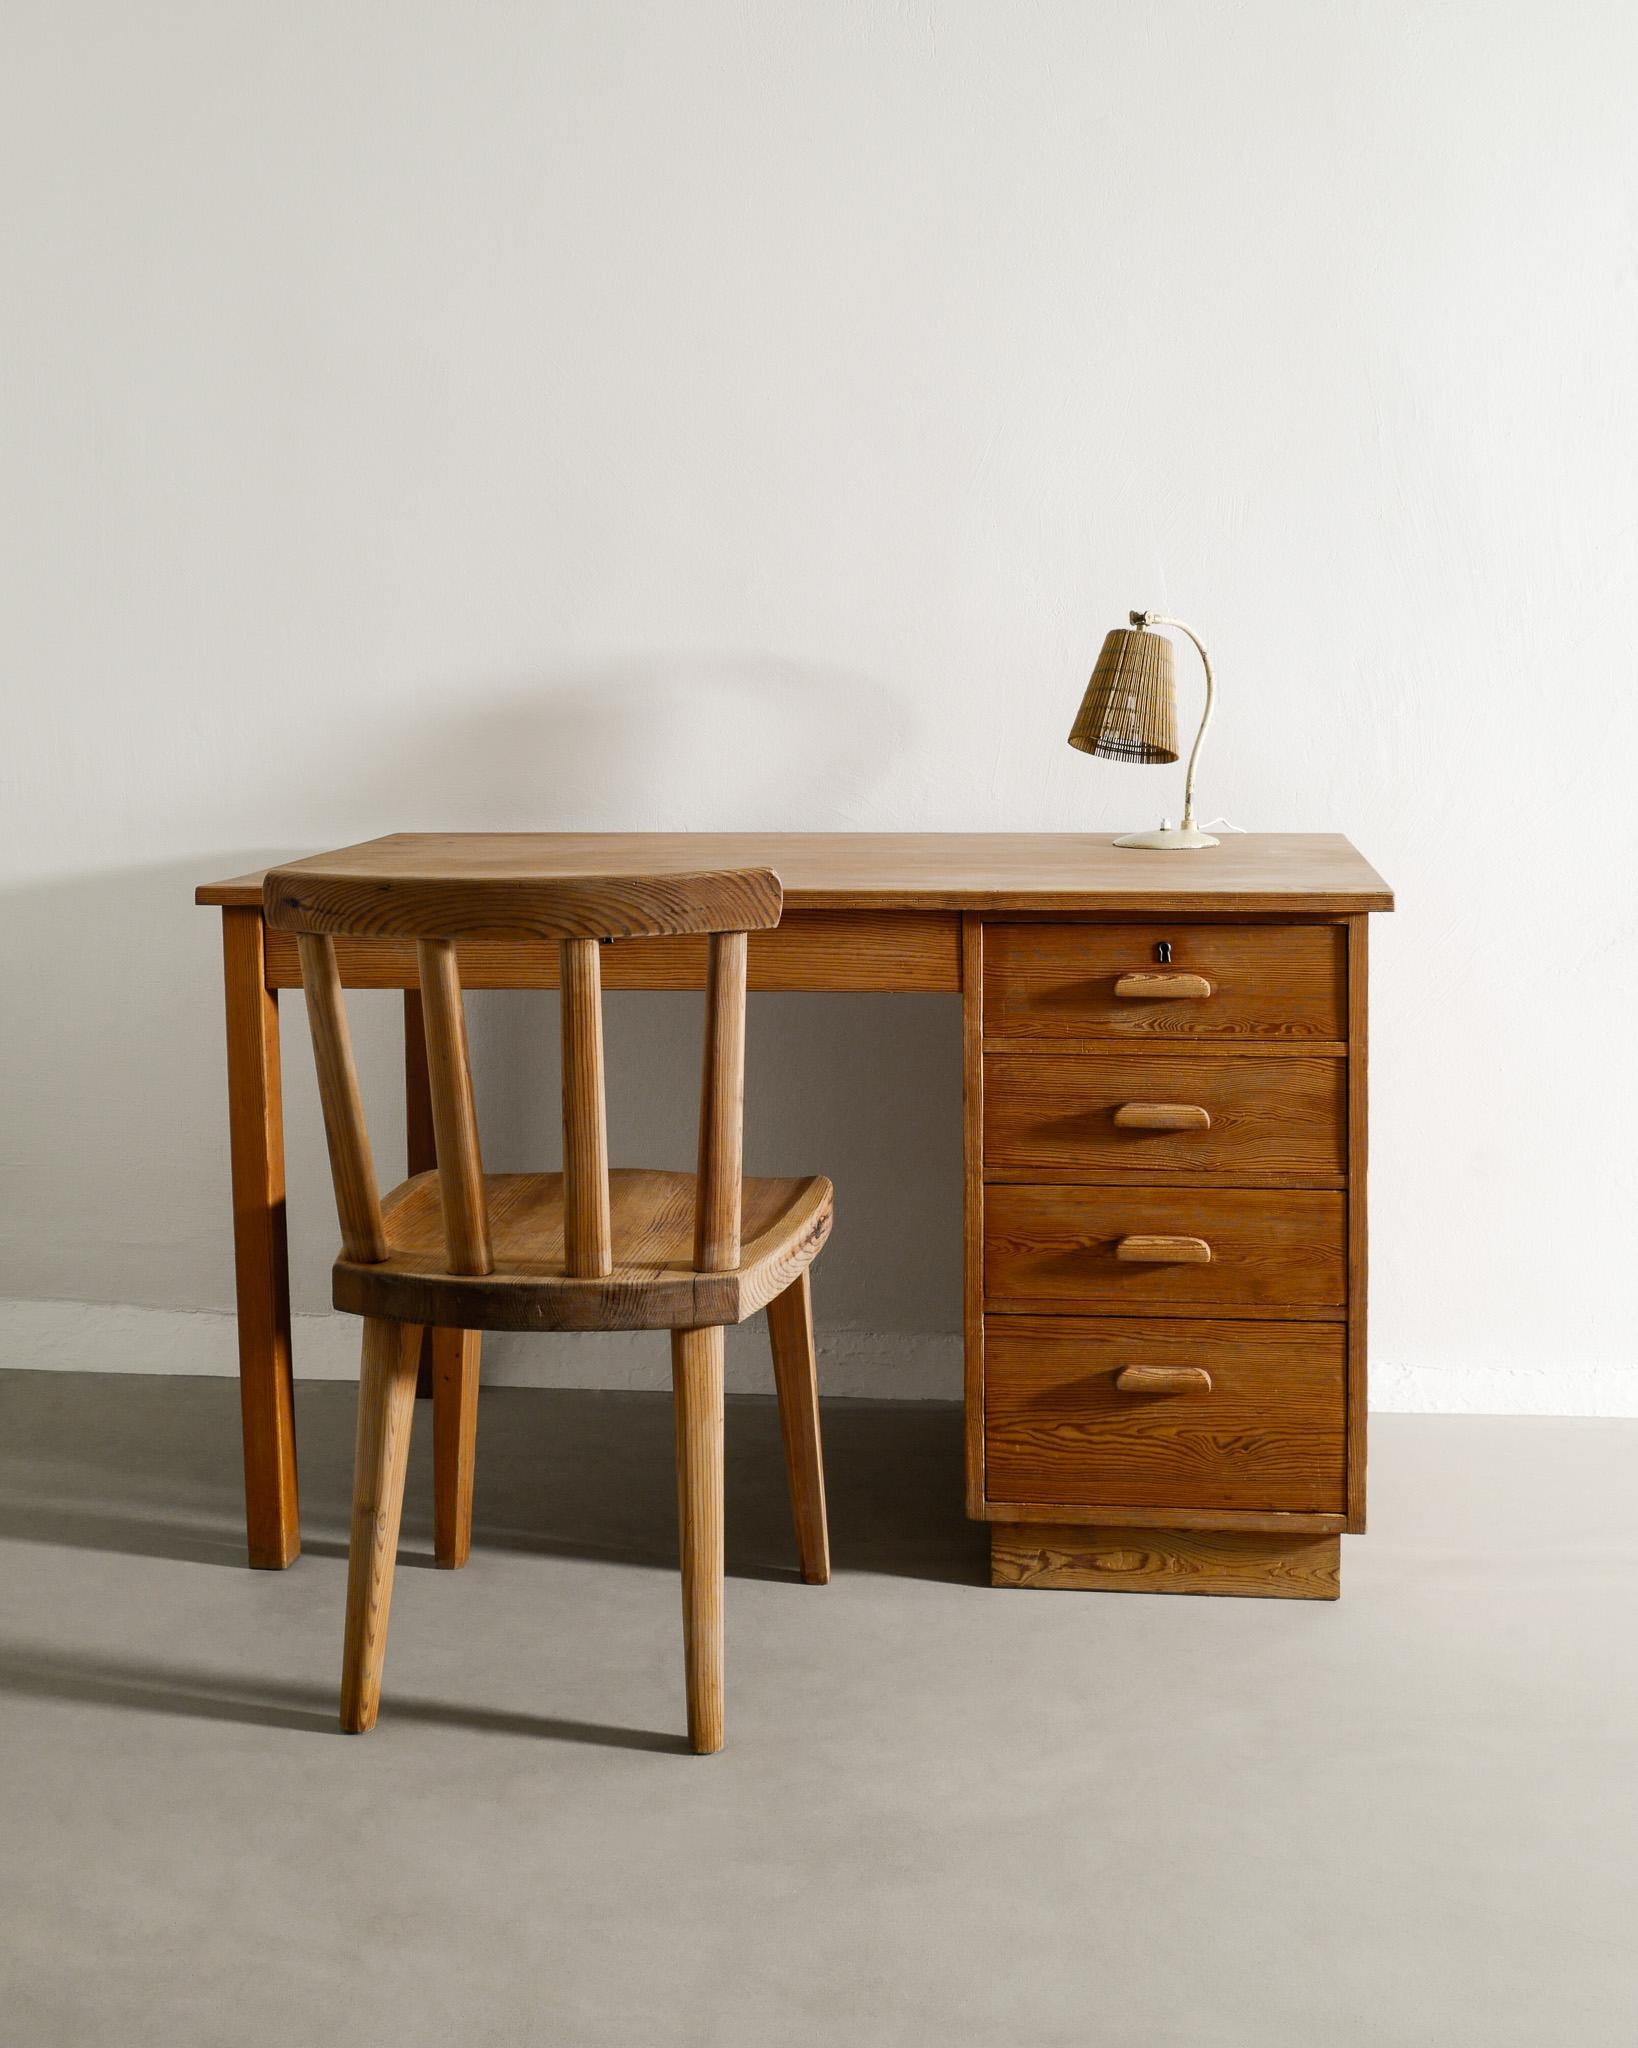 Mid-20th Century Single Wooden Dining Utö Chair in Pine by Axel Einar Hjorth for NK Sweden, 1932 For Sale